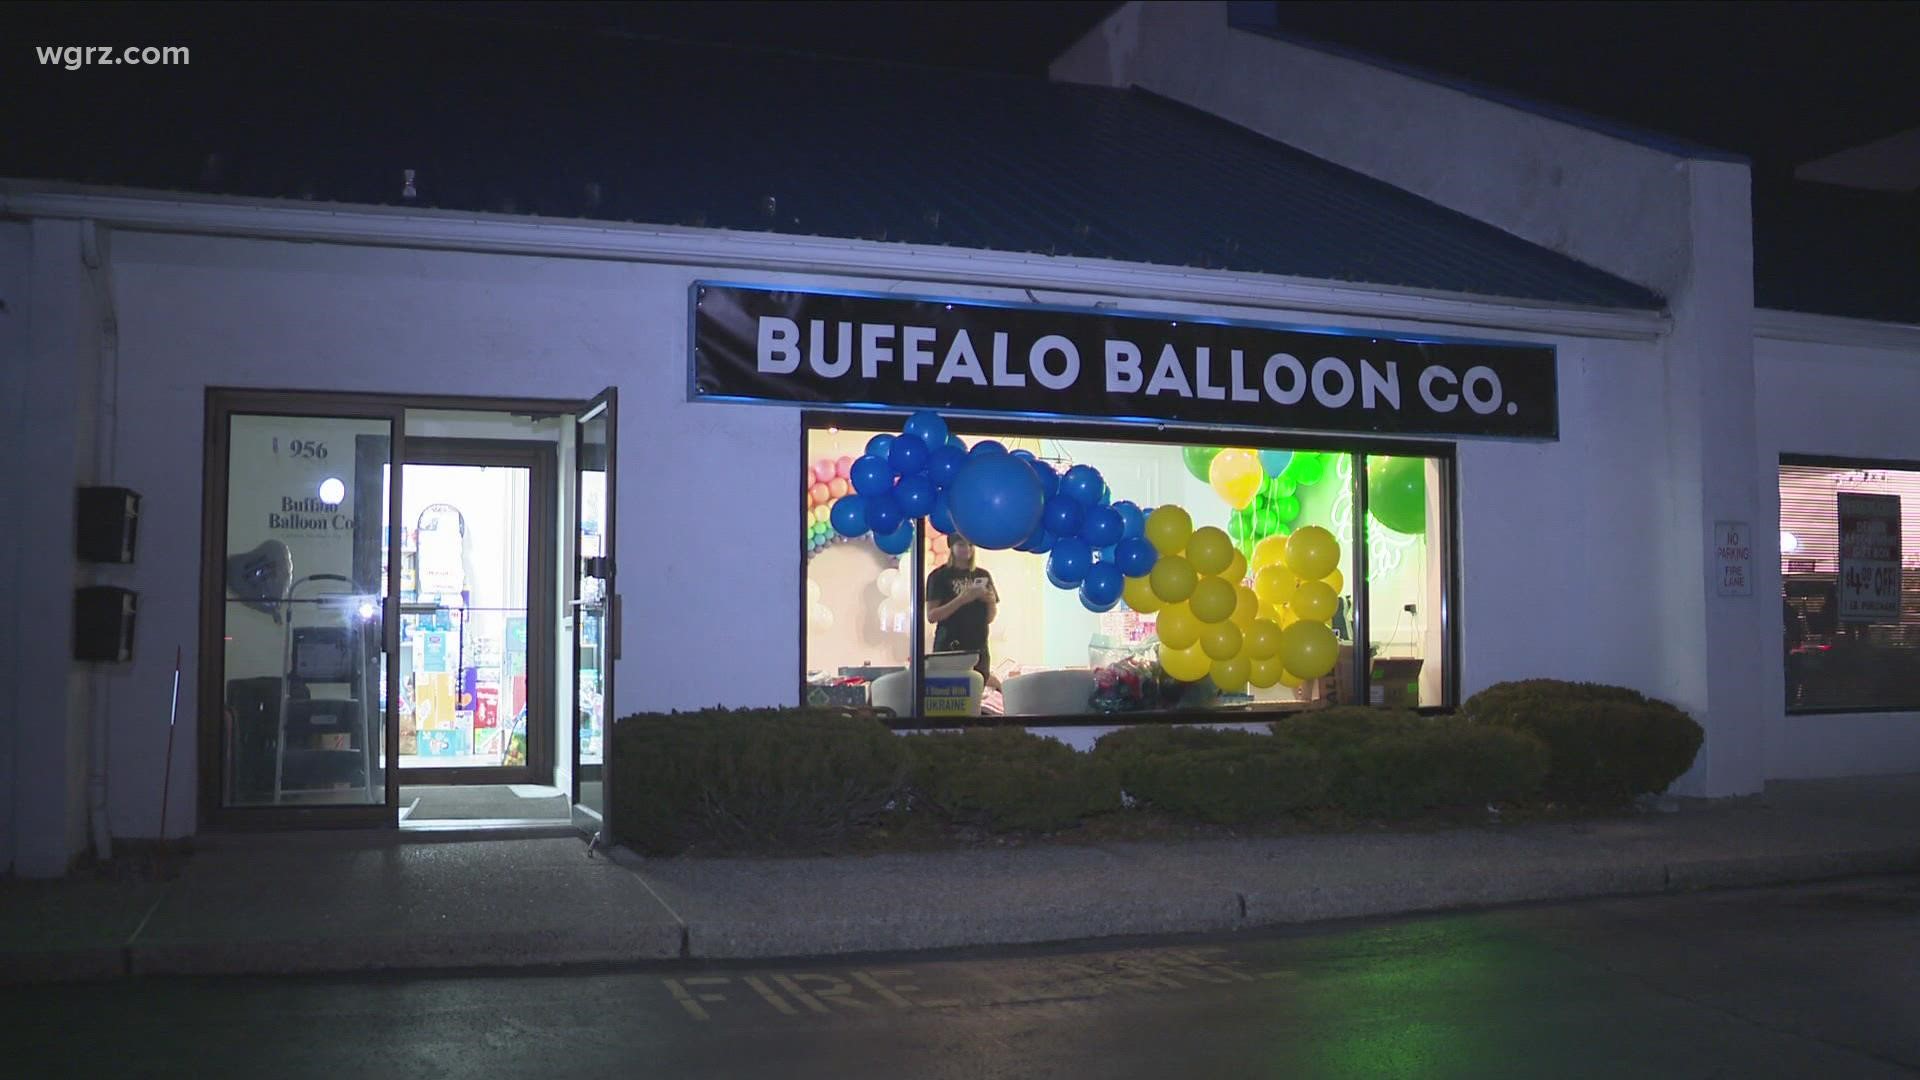 Buffalo Balloon Company has been collecting much-needed items like medical supplies, clothing and non-perishable foods for those fleeing Ukraine.